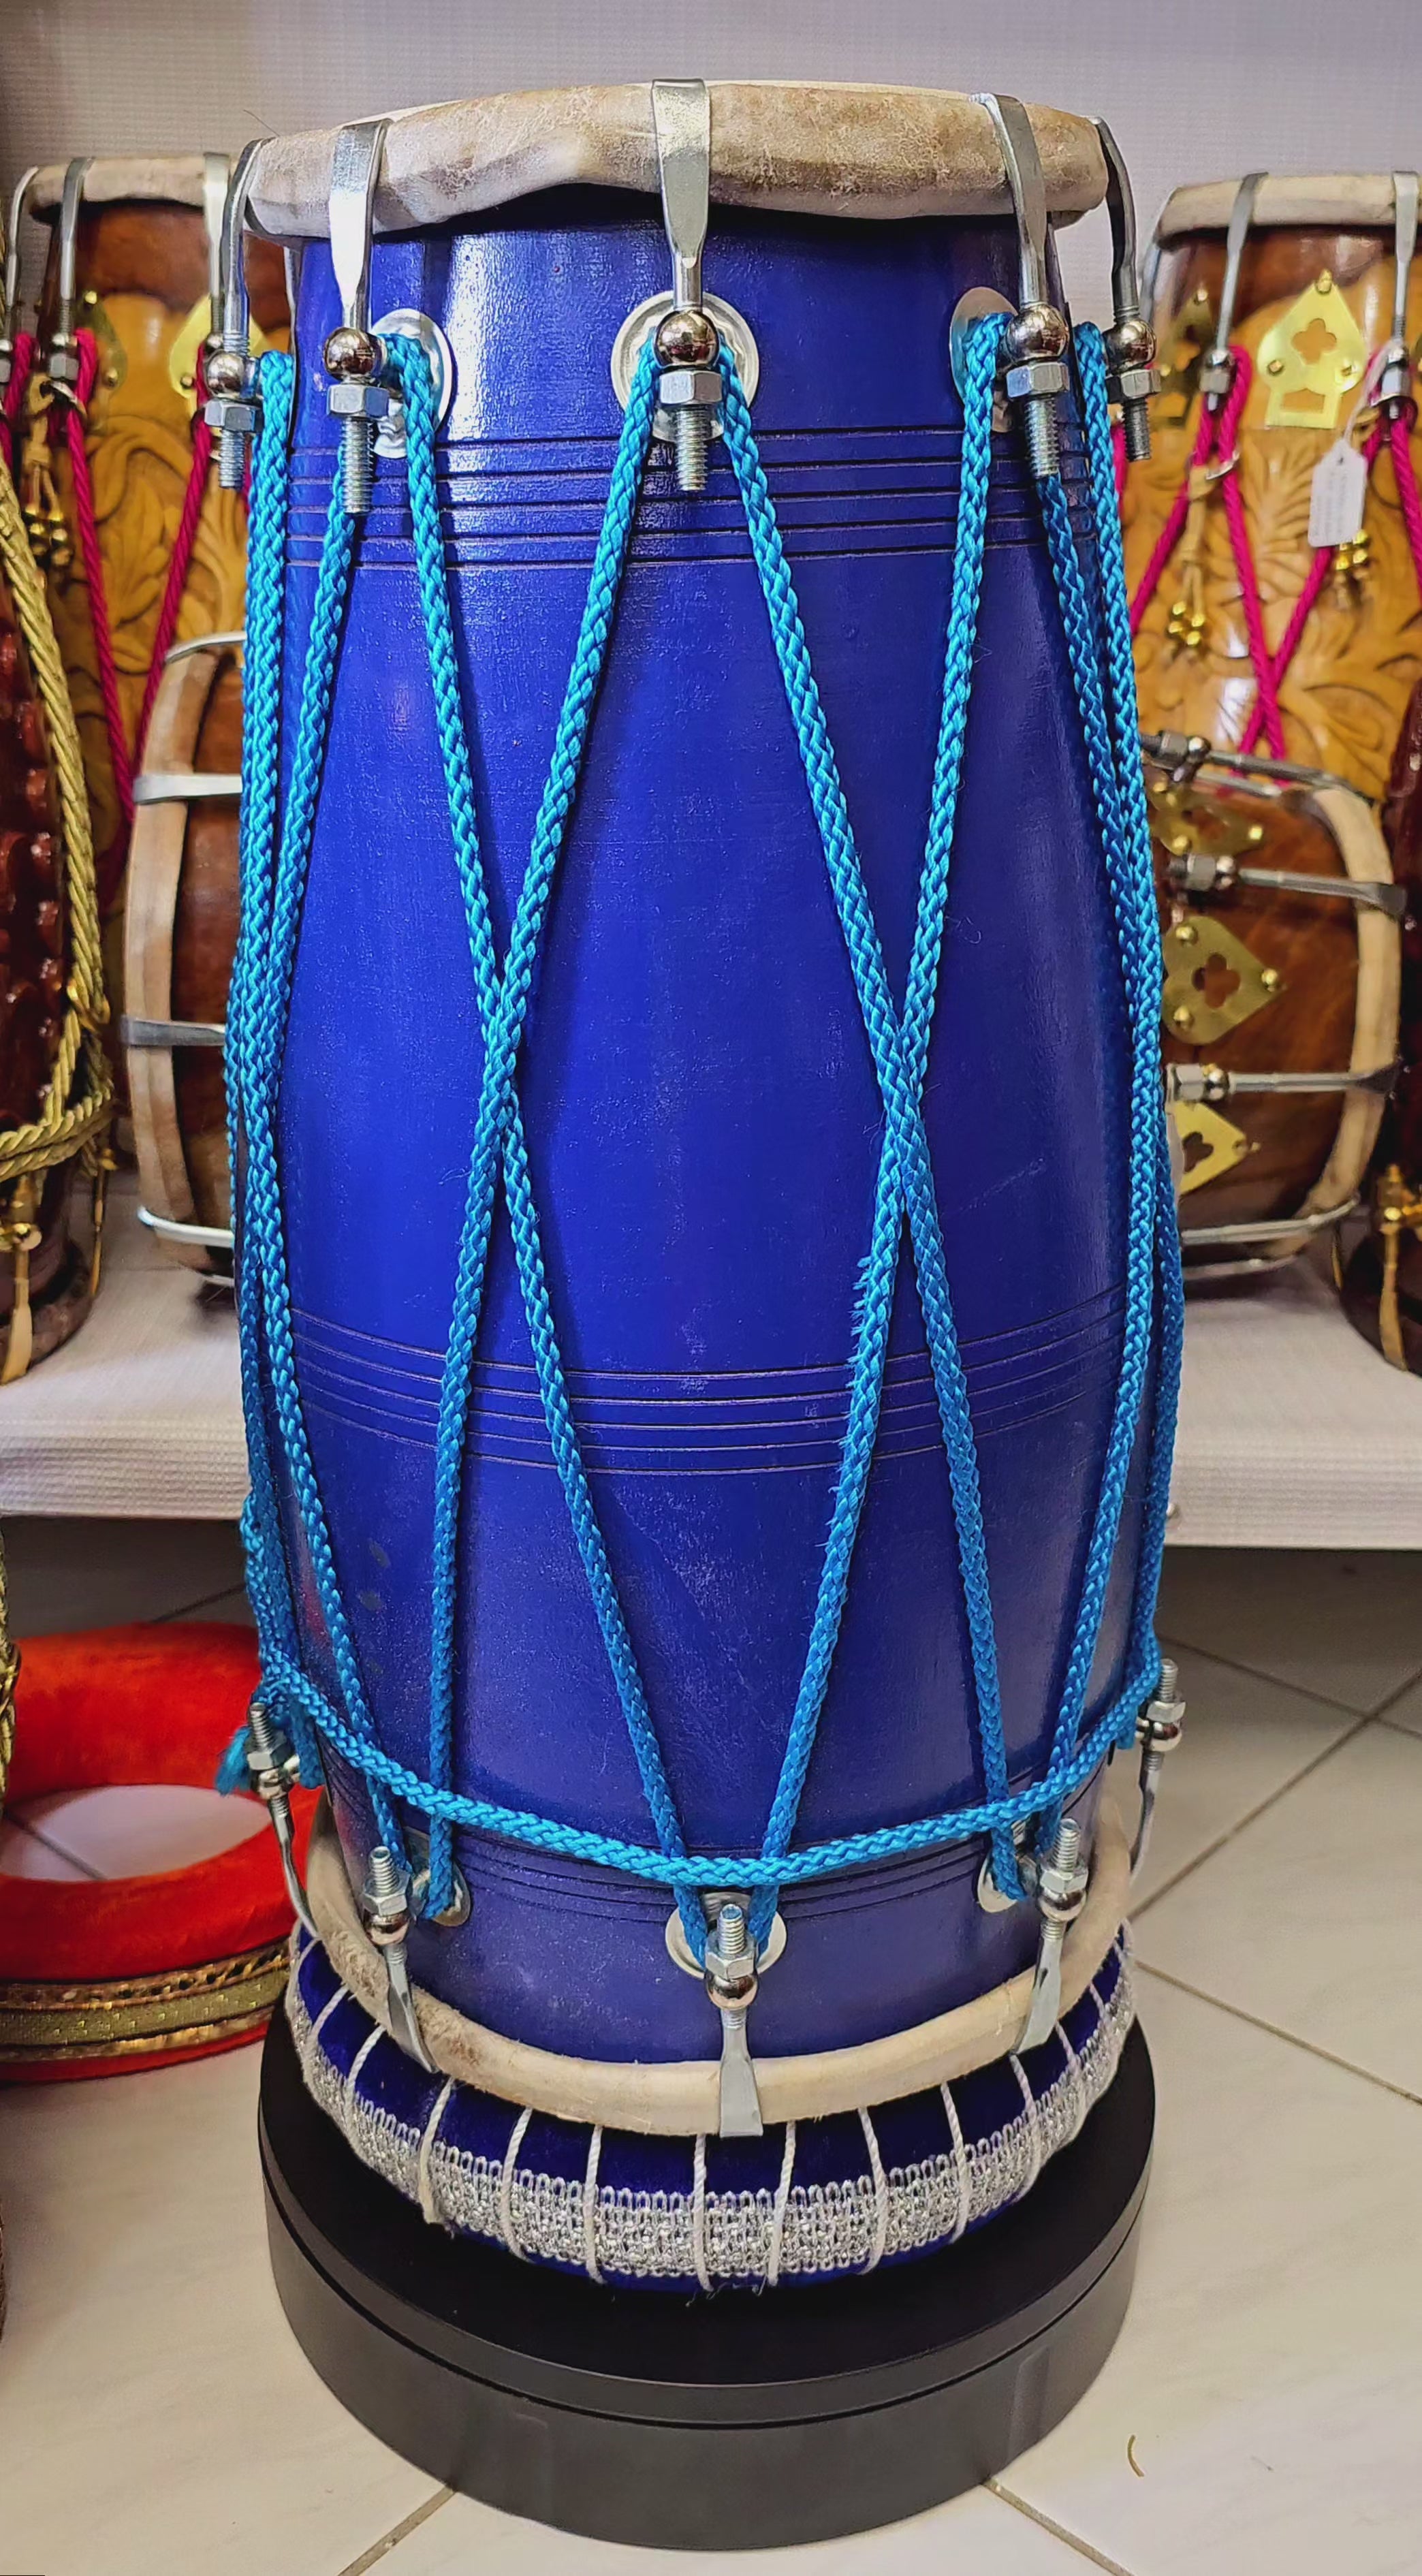 The Cobalt Crescendo Pro Dholak - A Blue Professional Dholak with Chrome Bolts and Striking Blue Ropes Design!